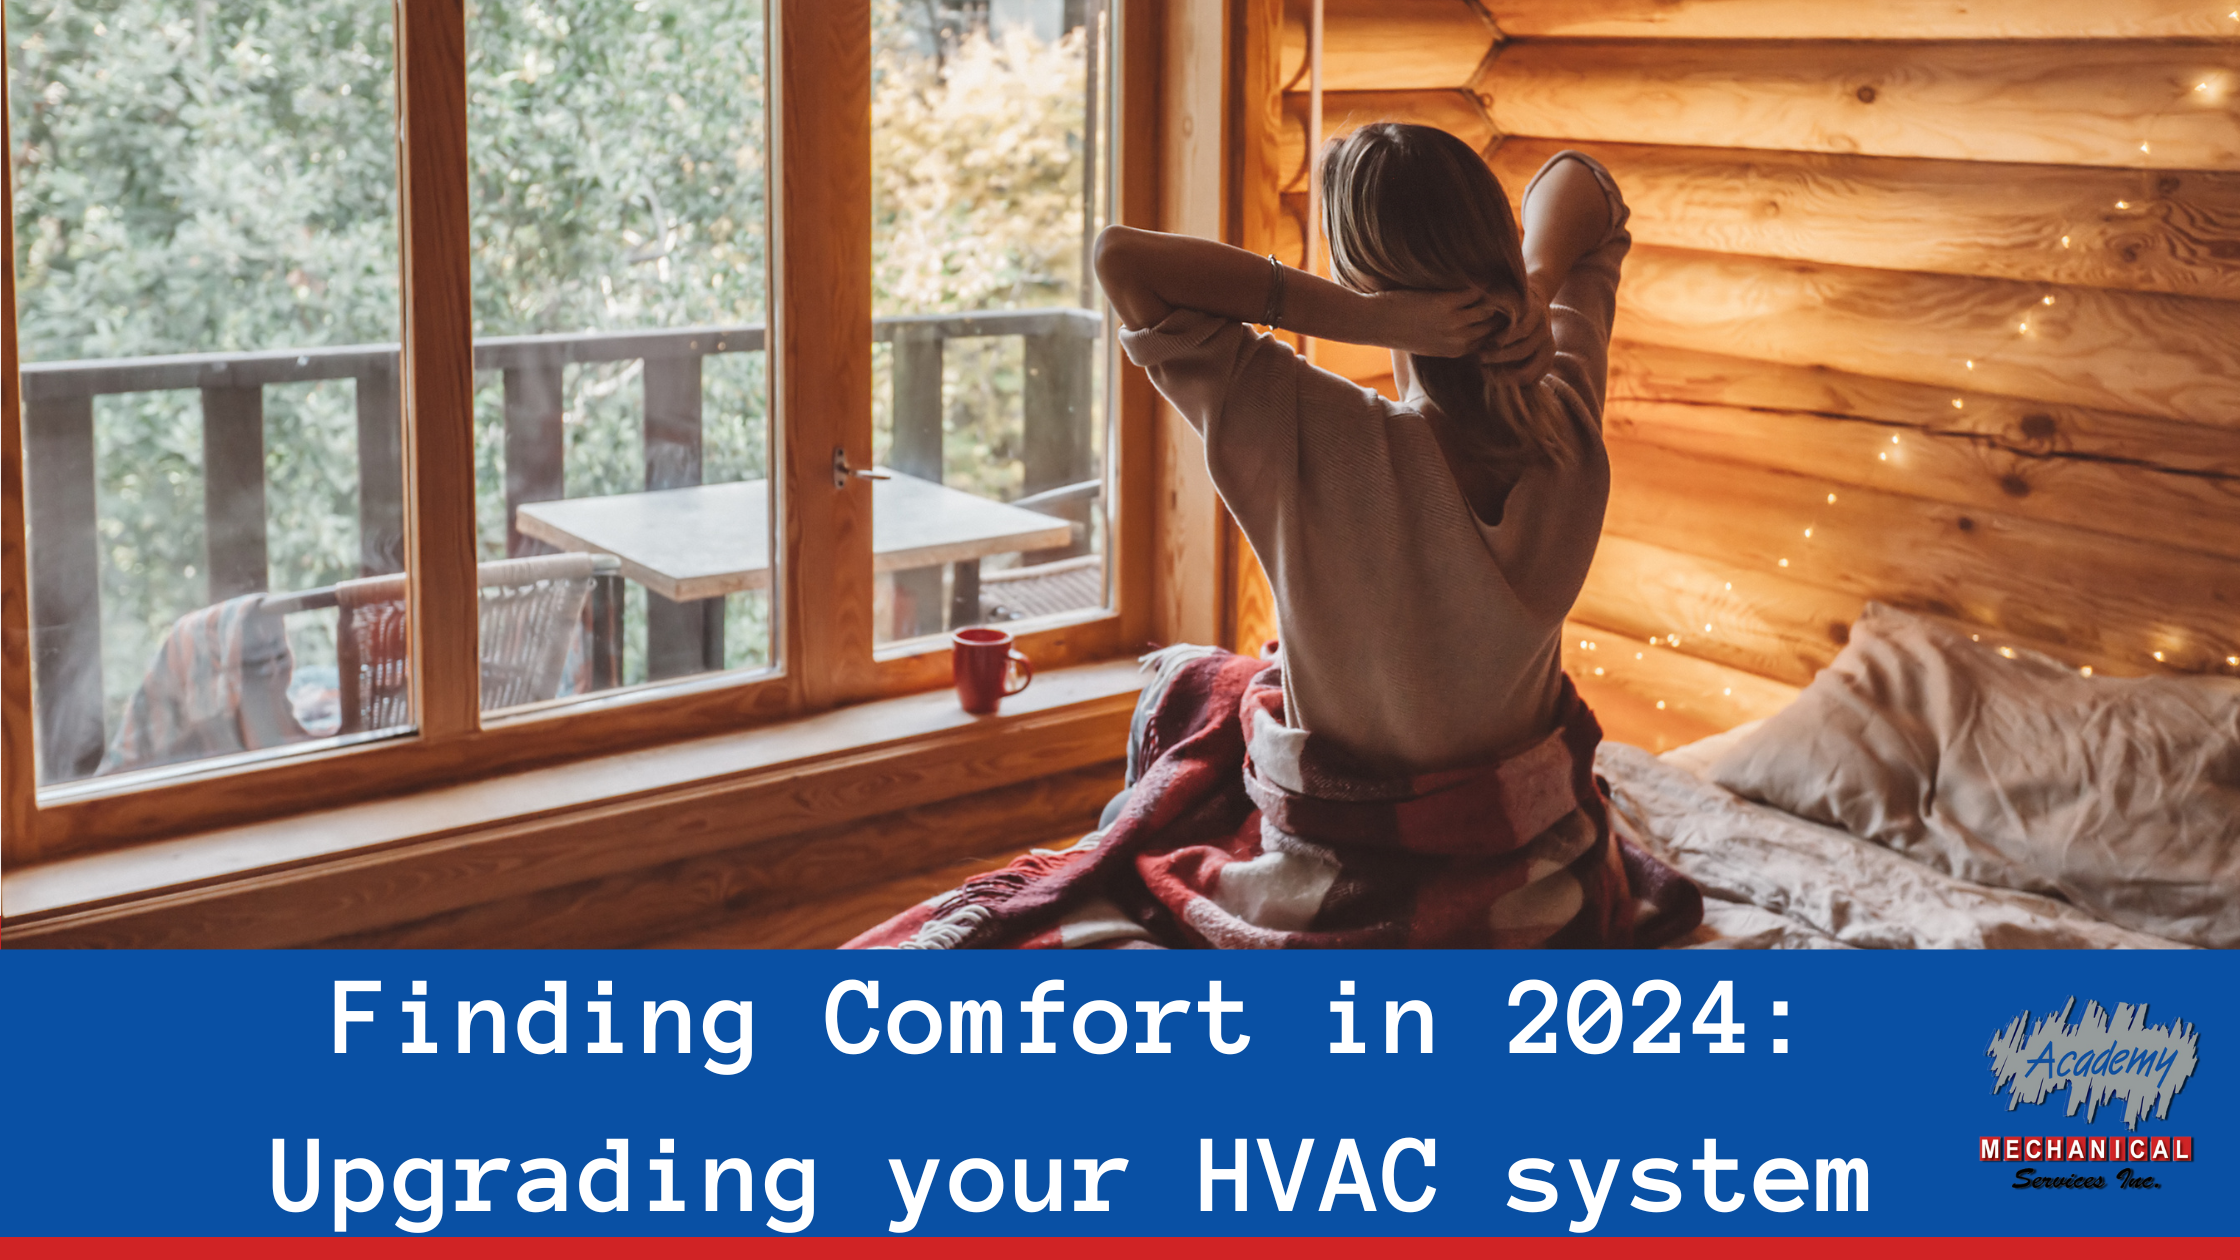 You are currently viewing Finding Comfort in 2024: Upgrading your HVAC System with Academy Mechanical Services 